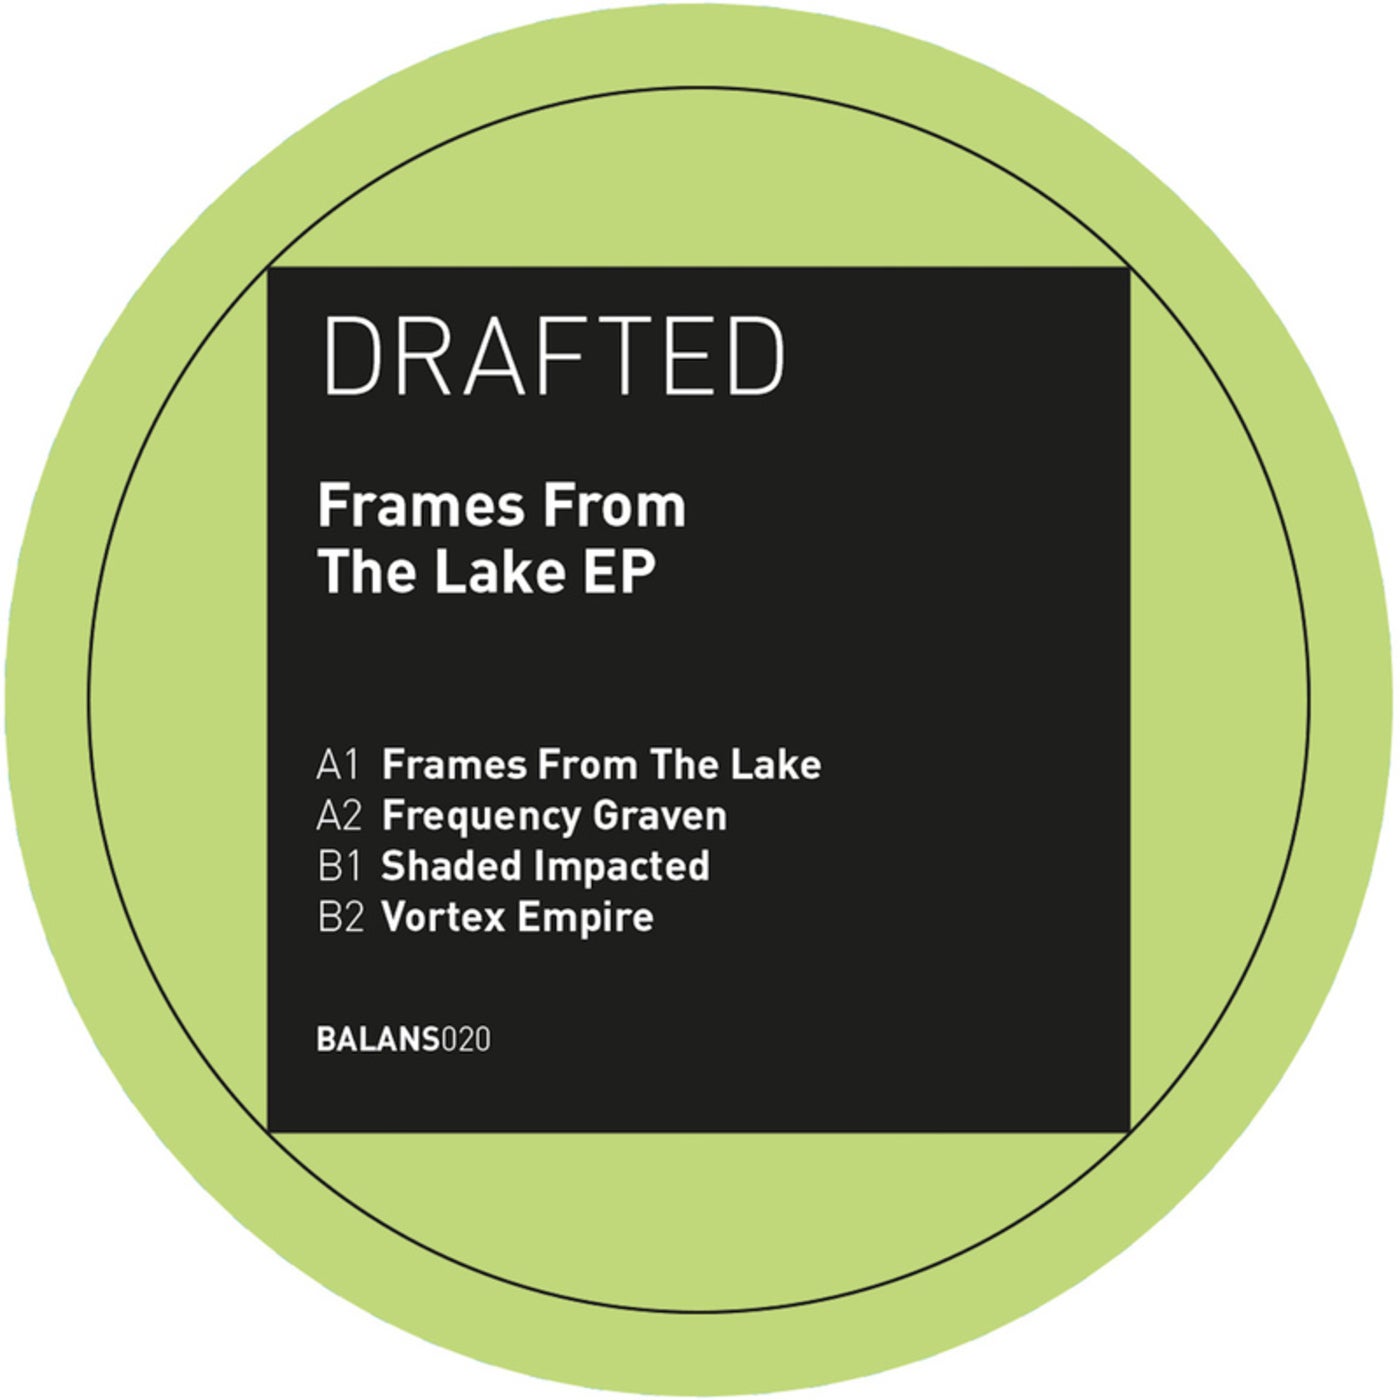 Frames from the Lake EP